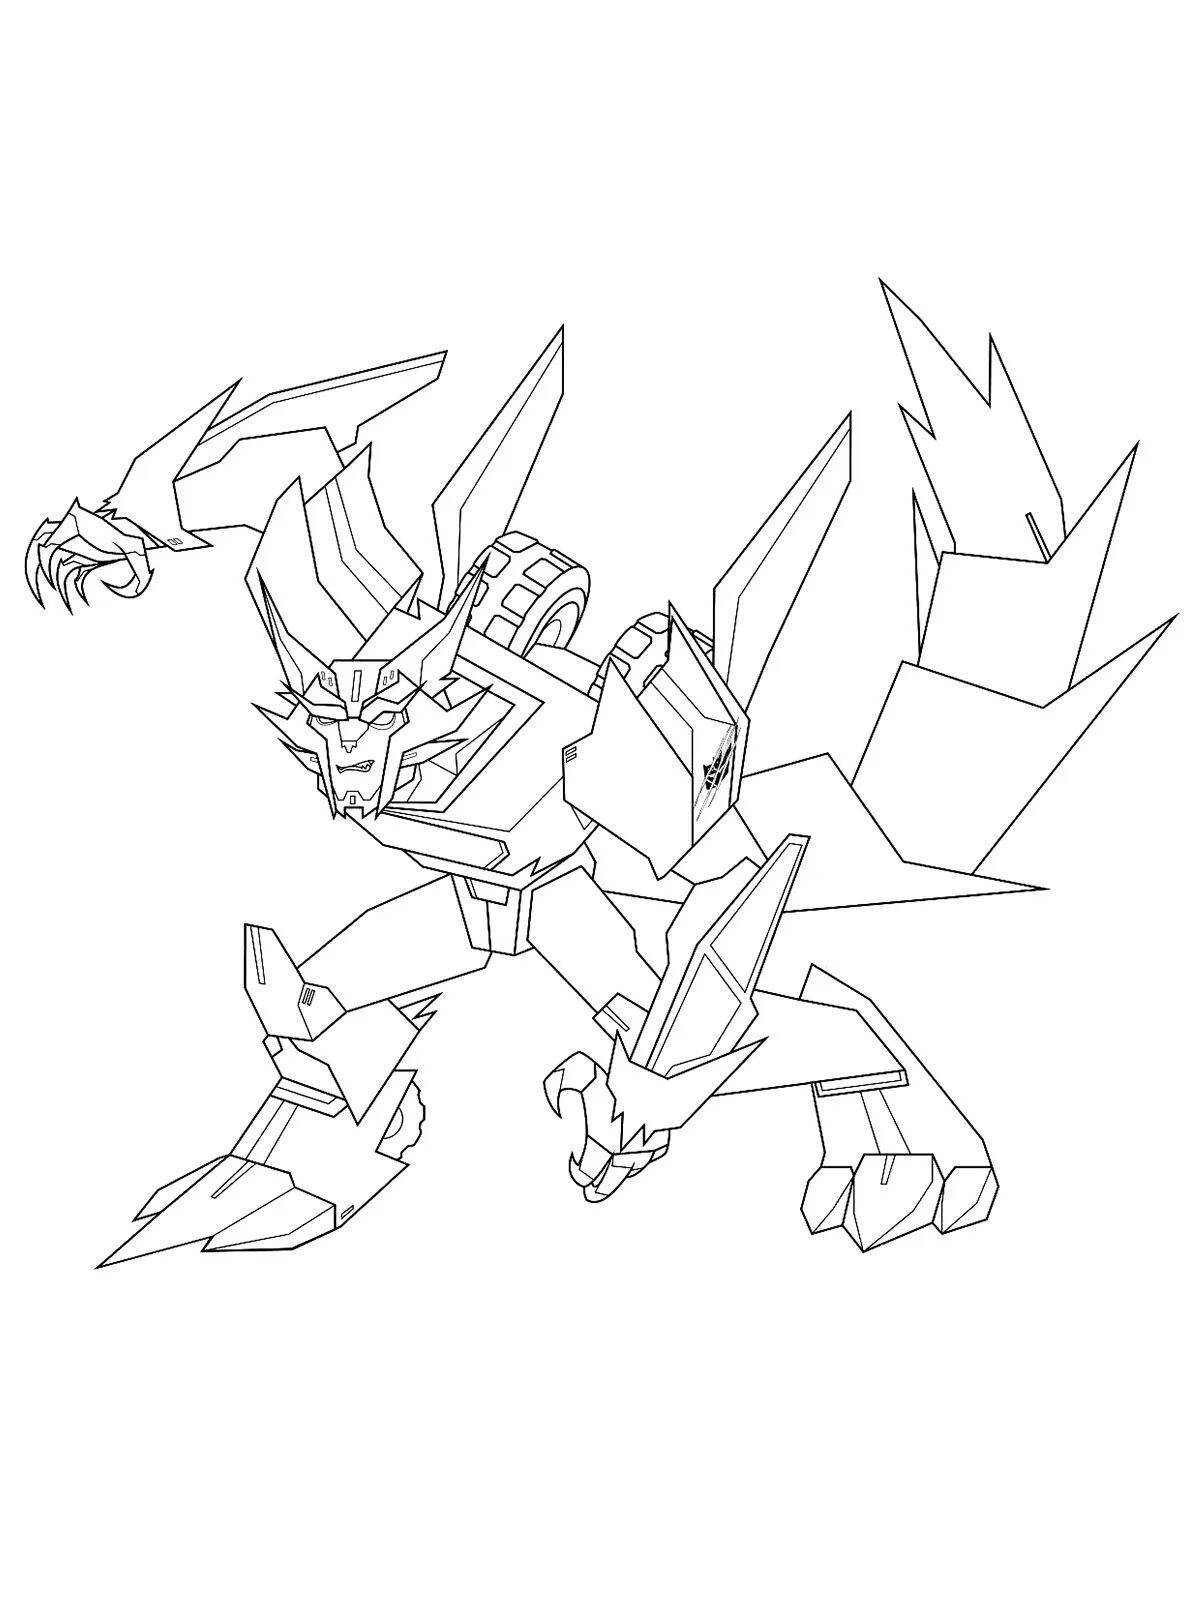 Animated barricade coloring page